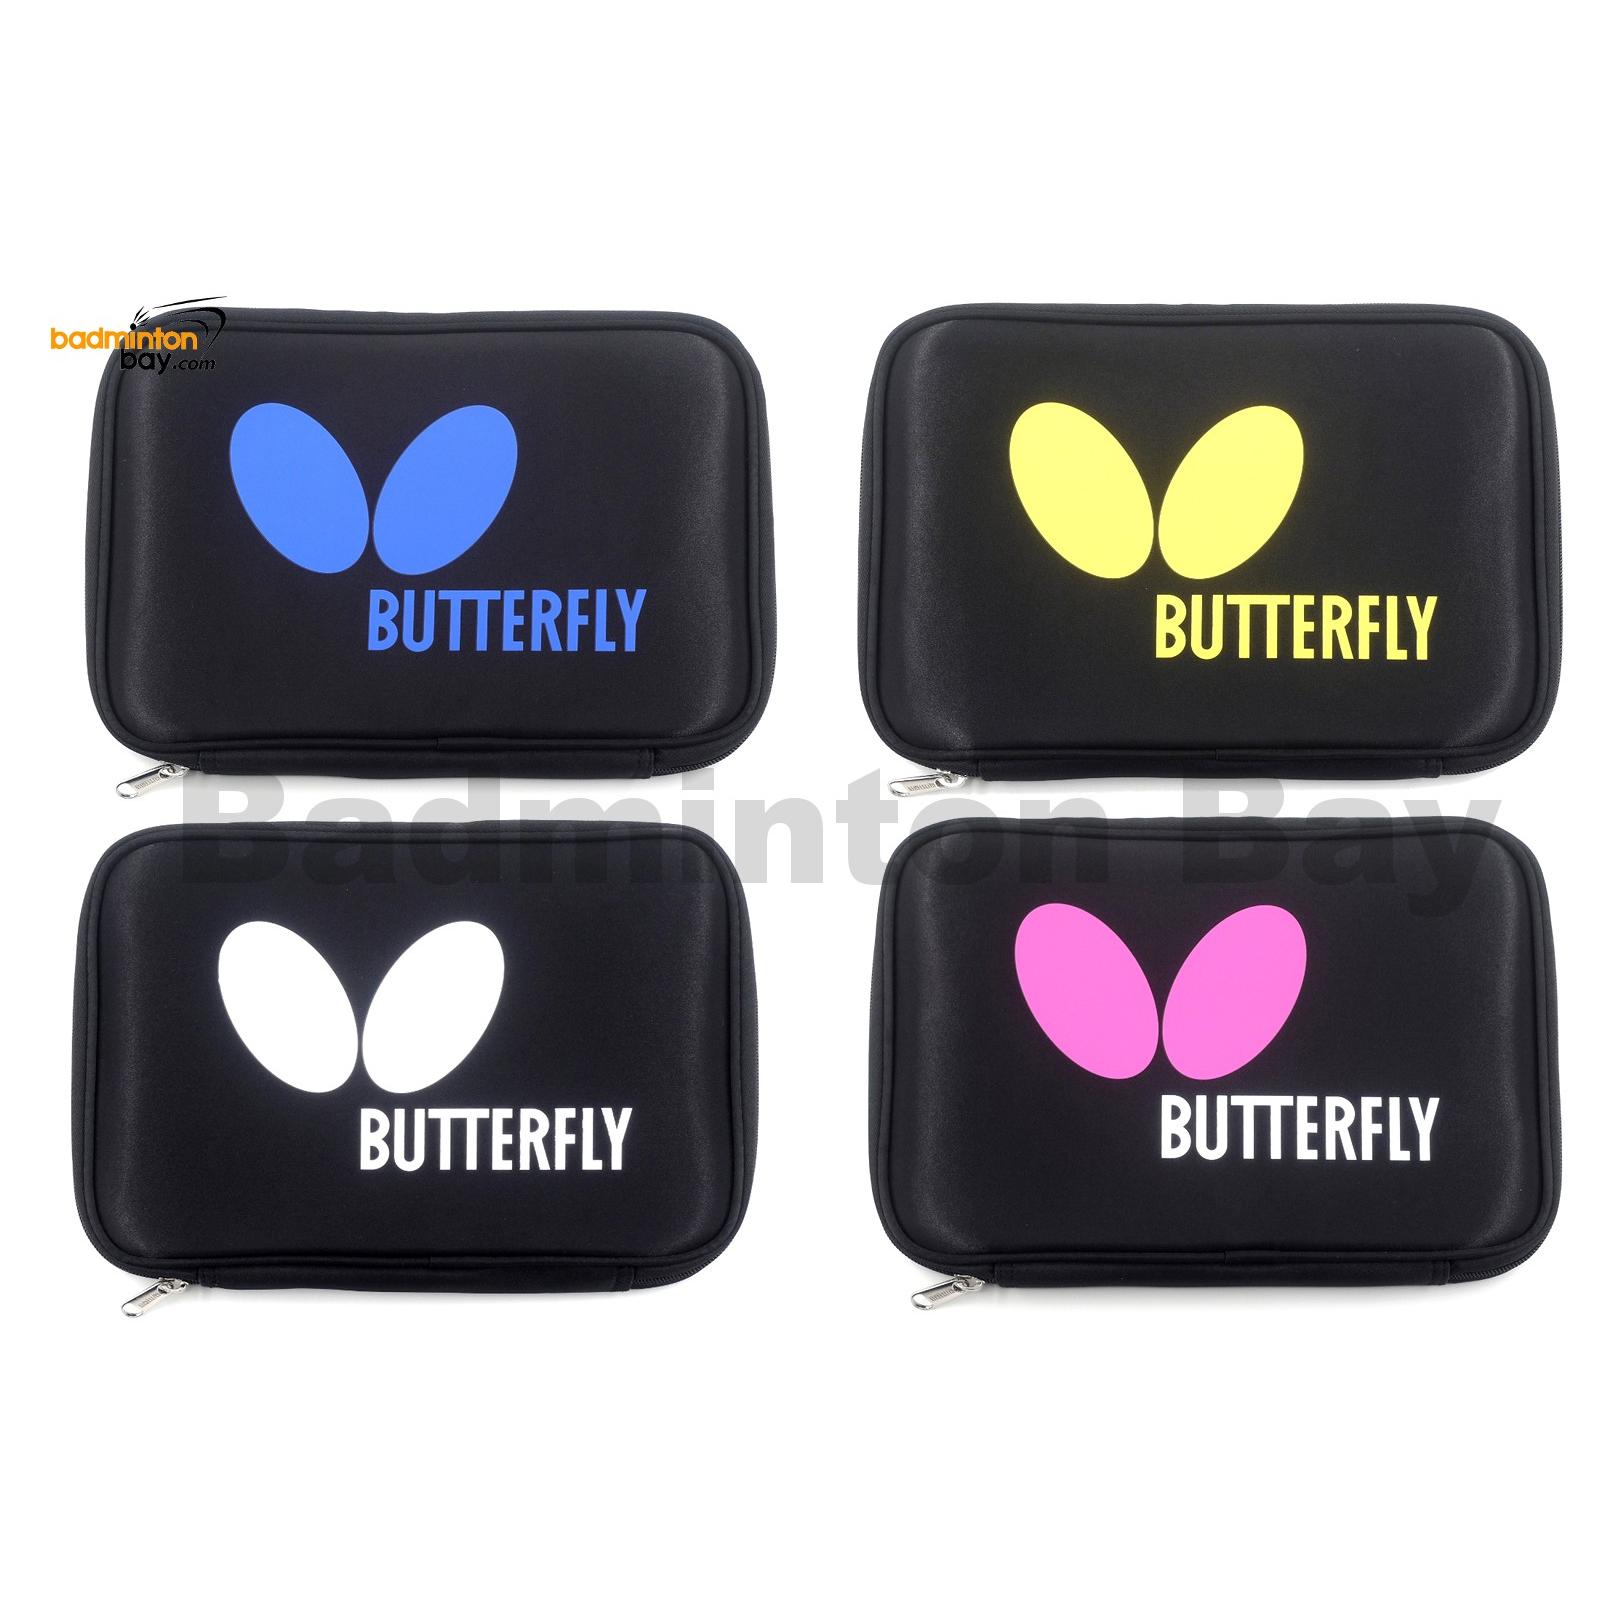 Full Logo Case for 1 bat █EZBOX SPORTS█ 2 Butterfly Table Tennis Pro Bat Cover 